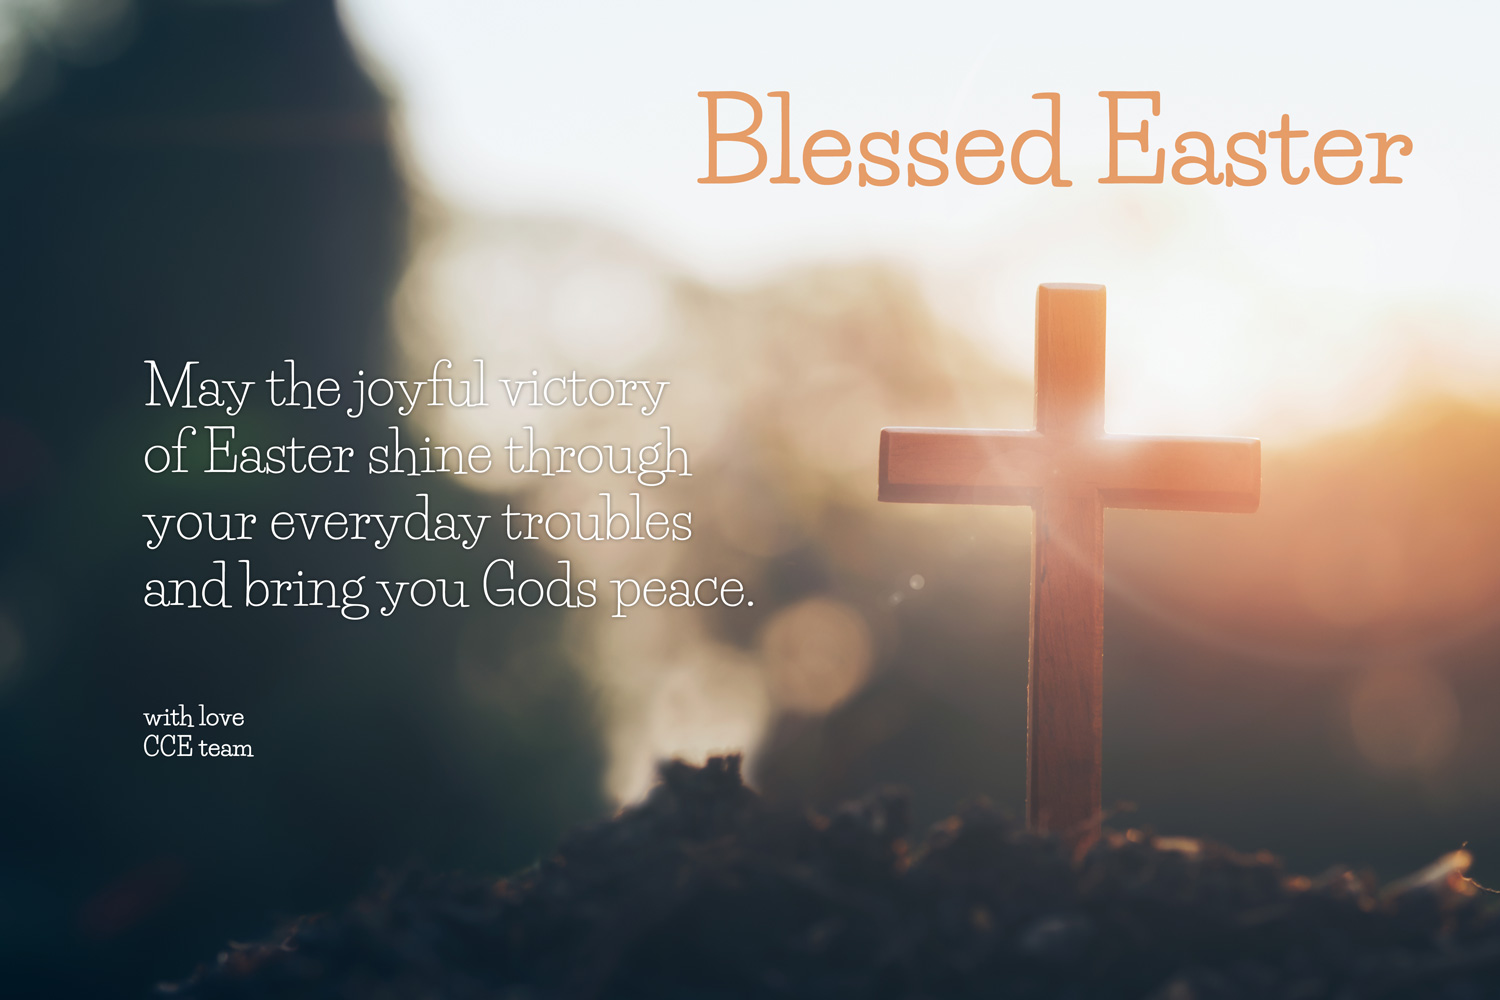 May the joyful victory of Easter shine through your everyday troubles and bring yuo Gods peace